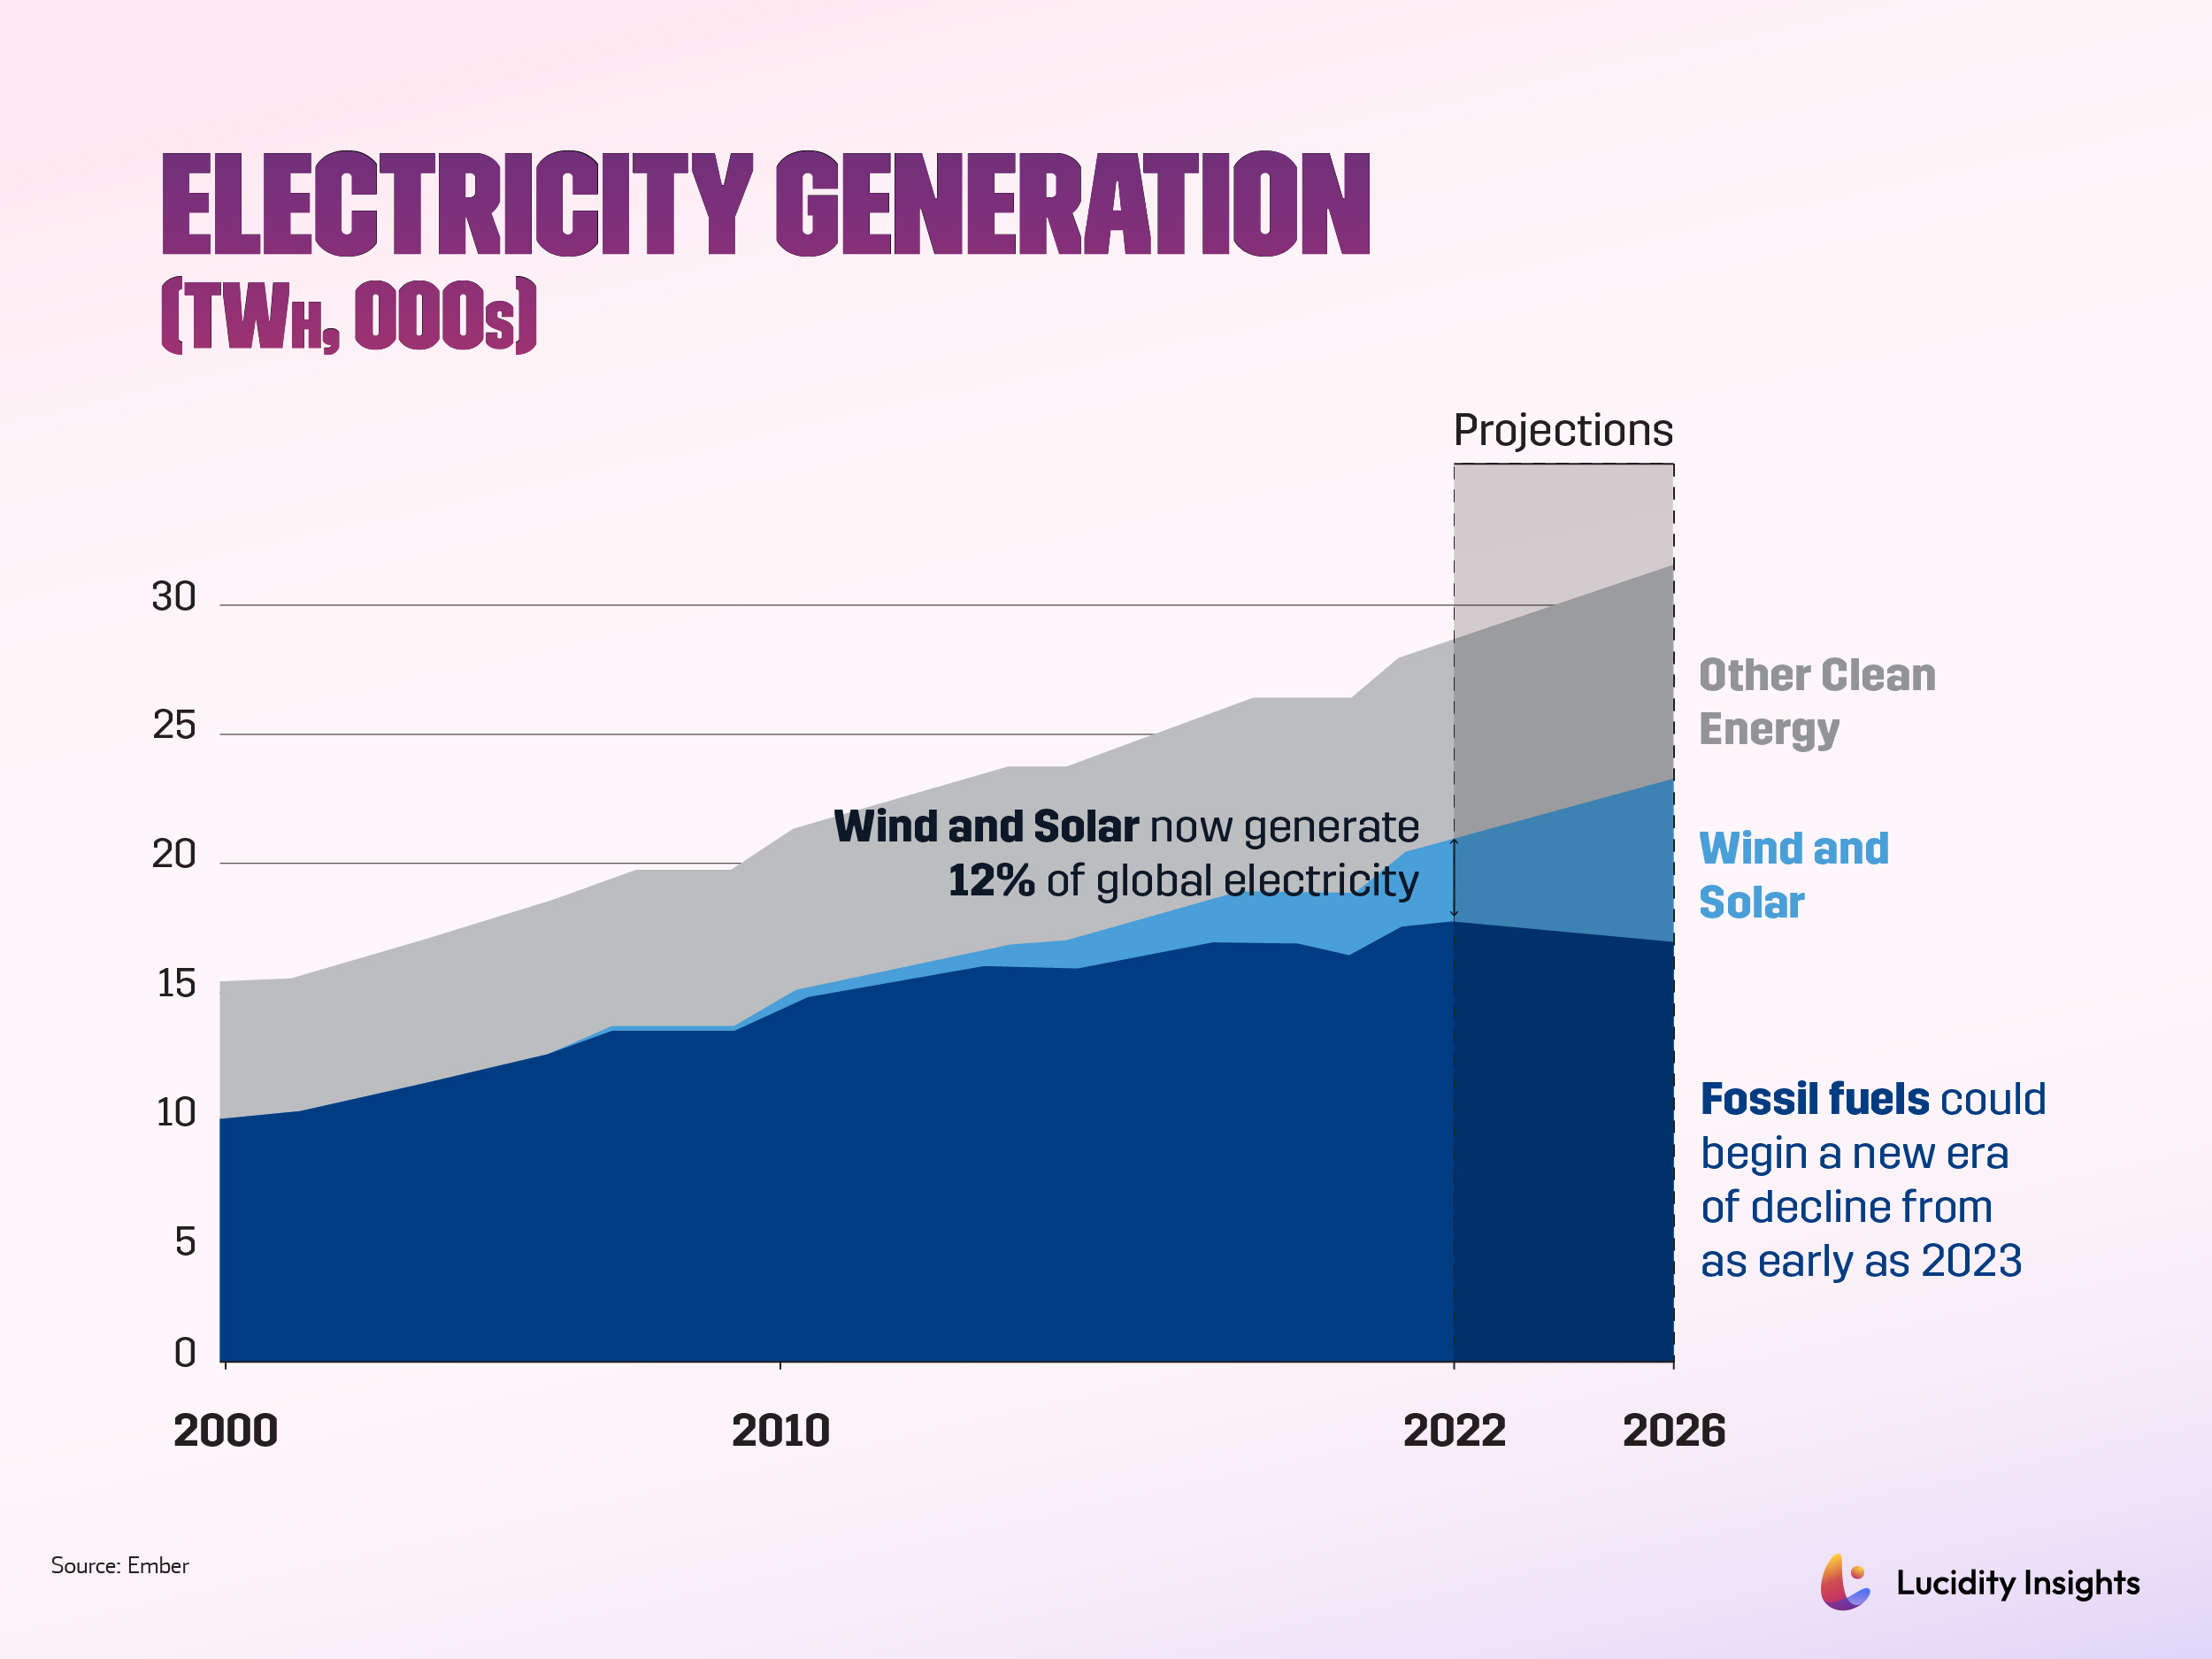 Electricity Generation (TWh,000s)